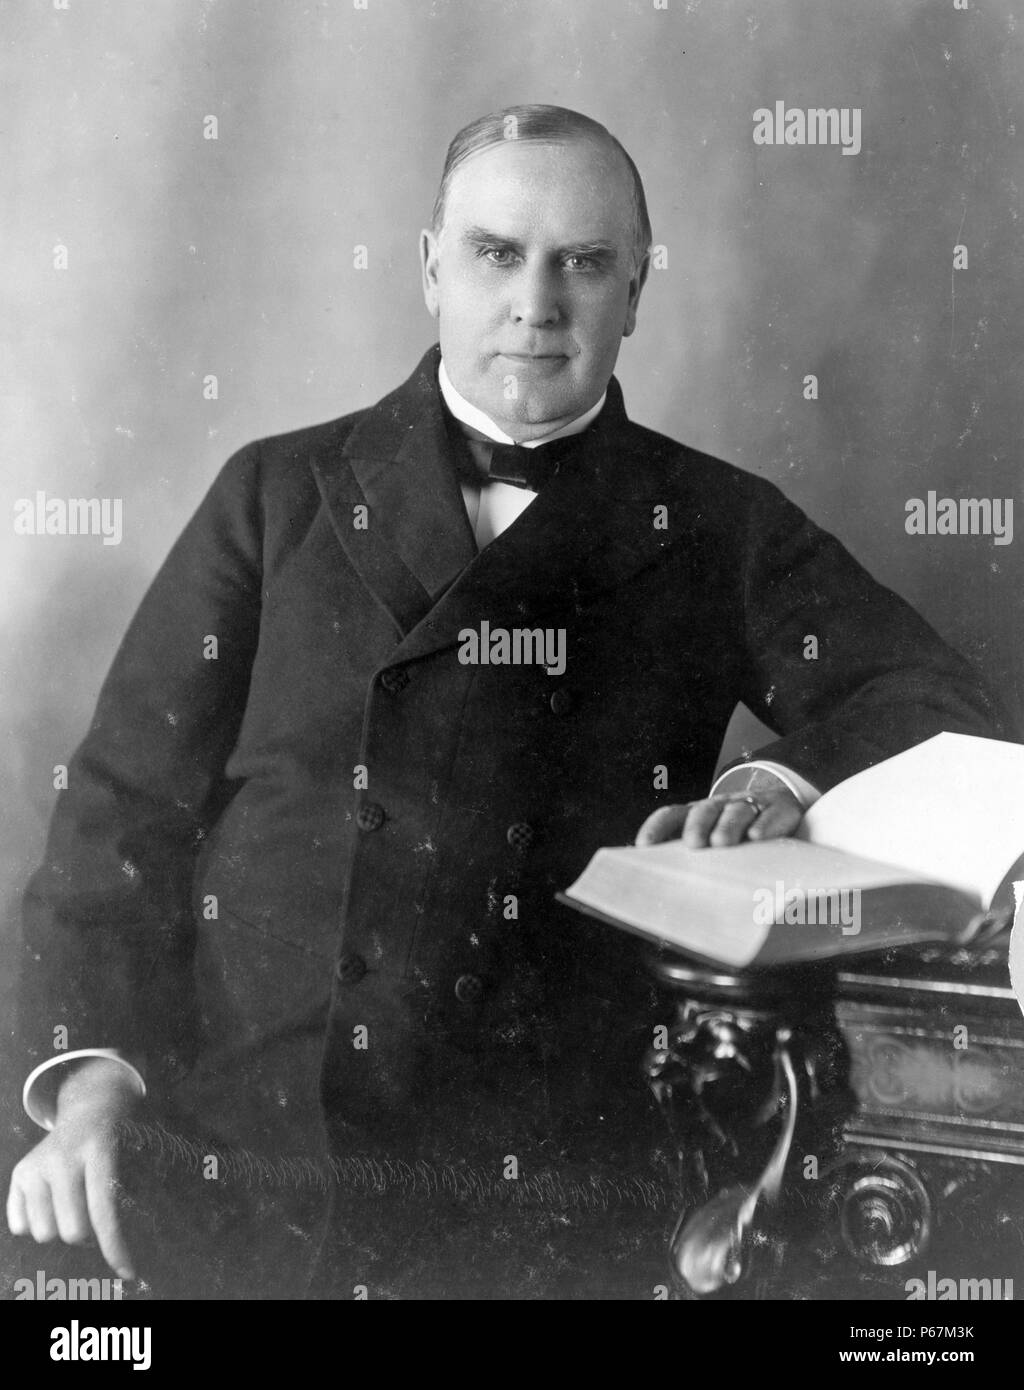 President William McKinley (1843-1901) was the 25th President of the United States, serving from March 4, 1897, until his assassination in September 1901, six months into his second term. McKinley led the nation to victory in the Spanish–American War, raised protective tariffs to promote American industry, and maintained the nation on the gold standard in a rejection of inflationary proposals. Stock Photo